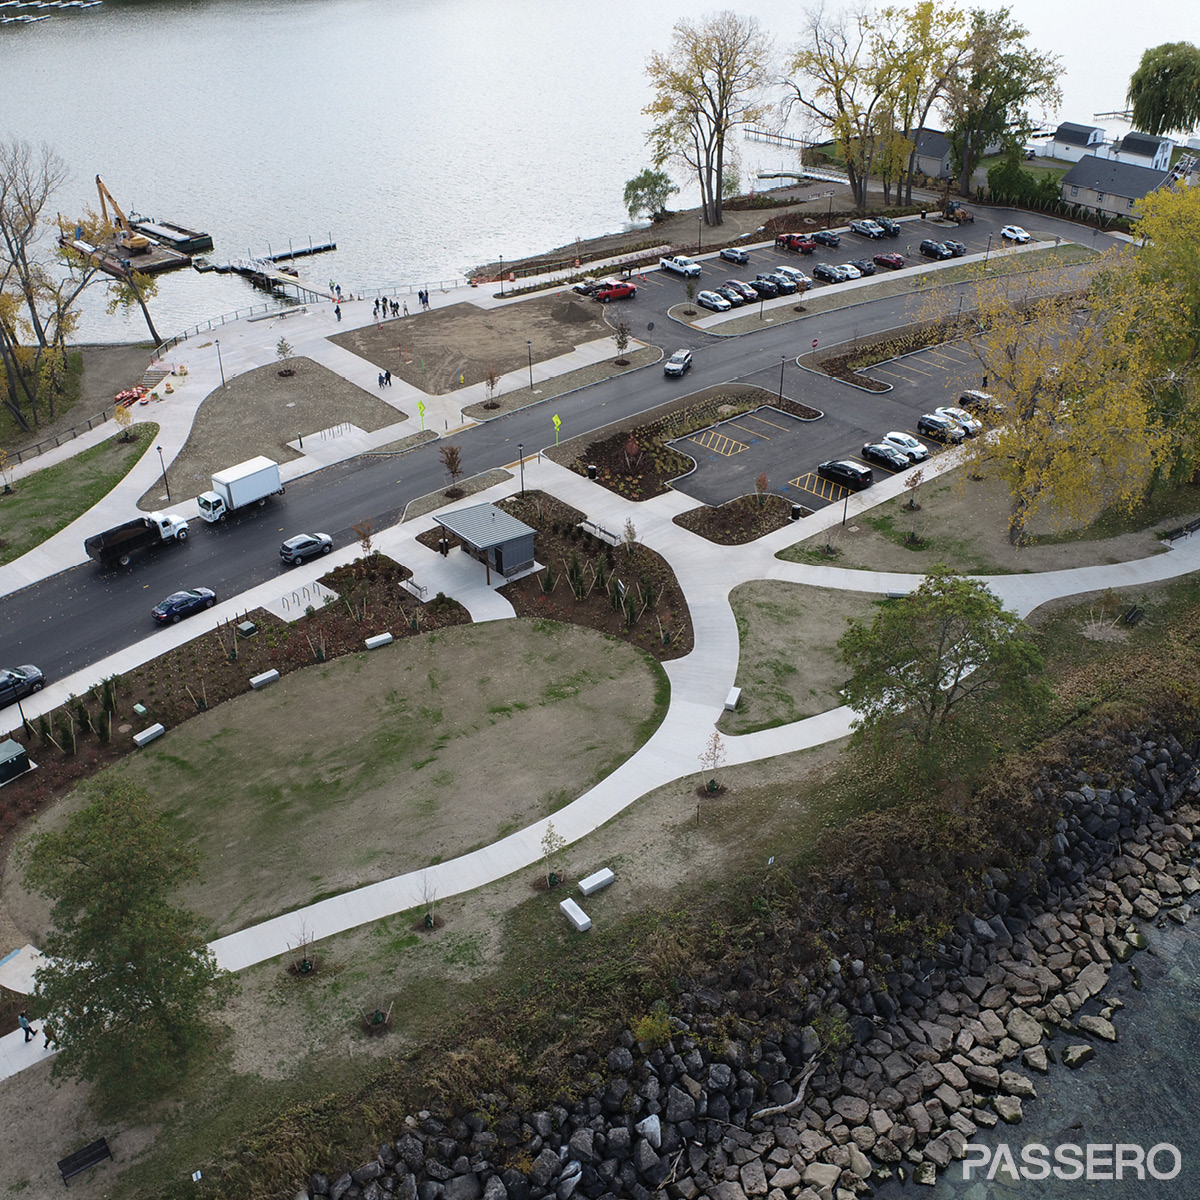 Join Passero in celebrating the grand opening of Sandbar Park in Webster, NY! We were honored to have members of the NYS legislature and Town of Webster officials join us to support this multi-million dollar revitalization project.

#SandbarParkOpening #CommunityRevitalization